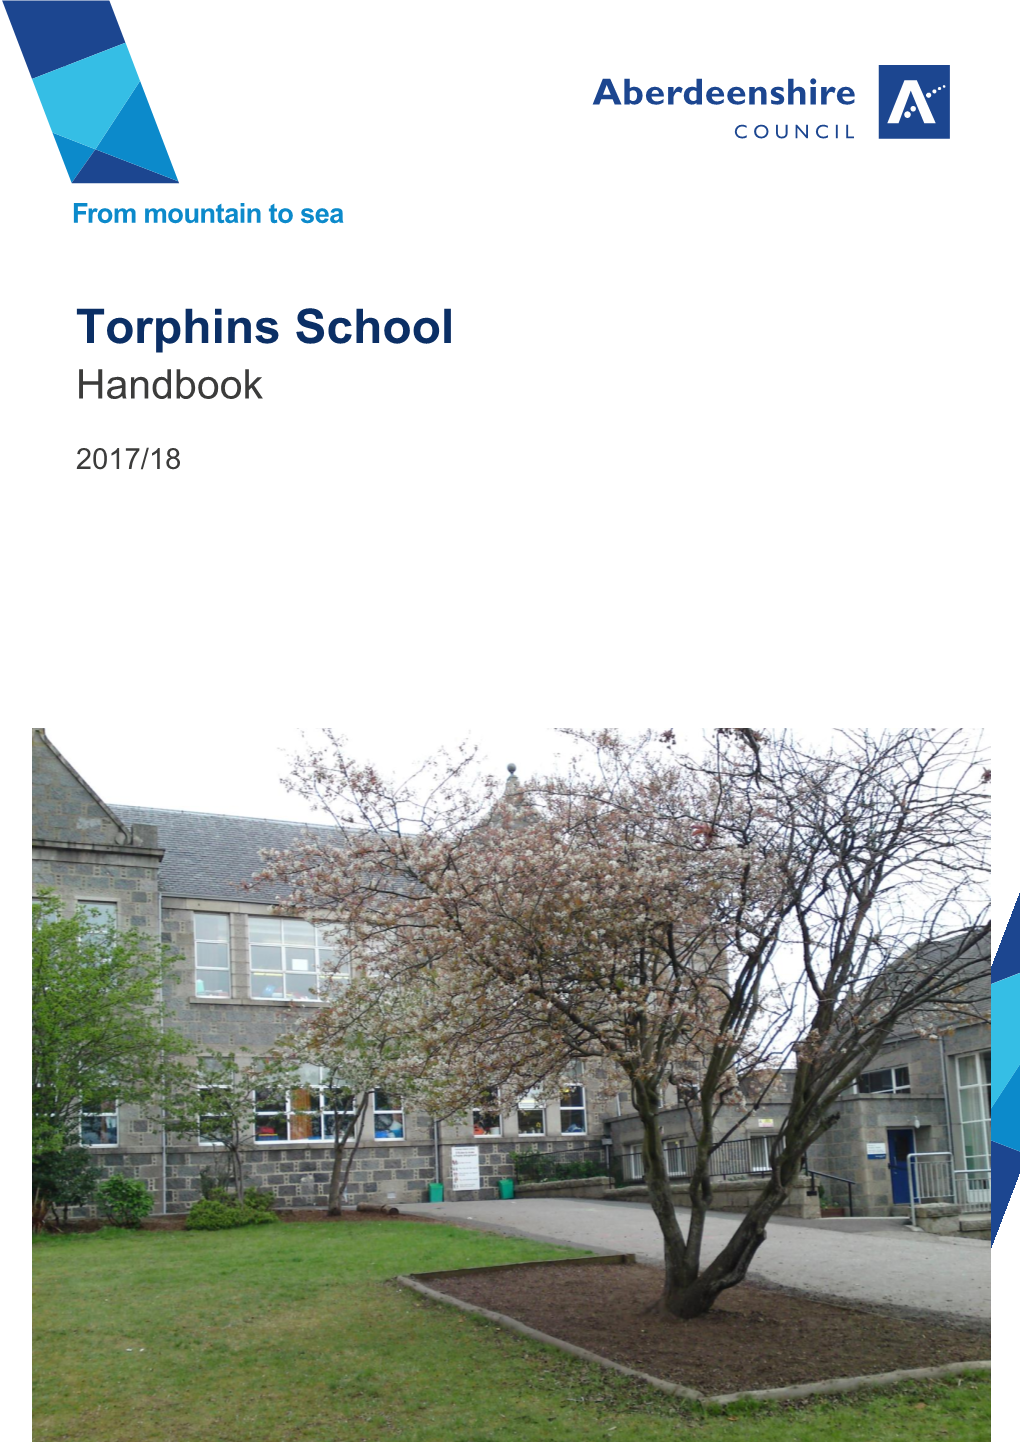 Introduction to Torphins School 4